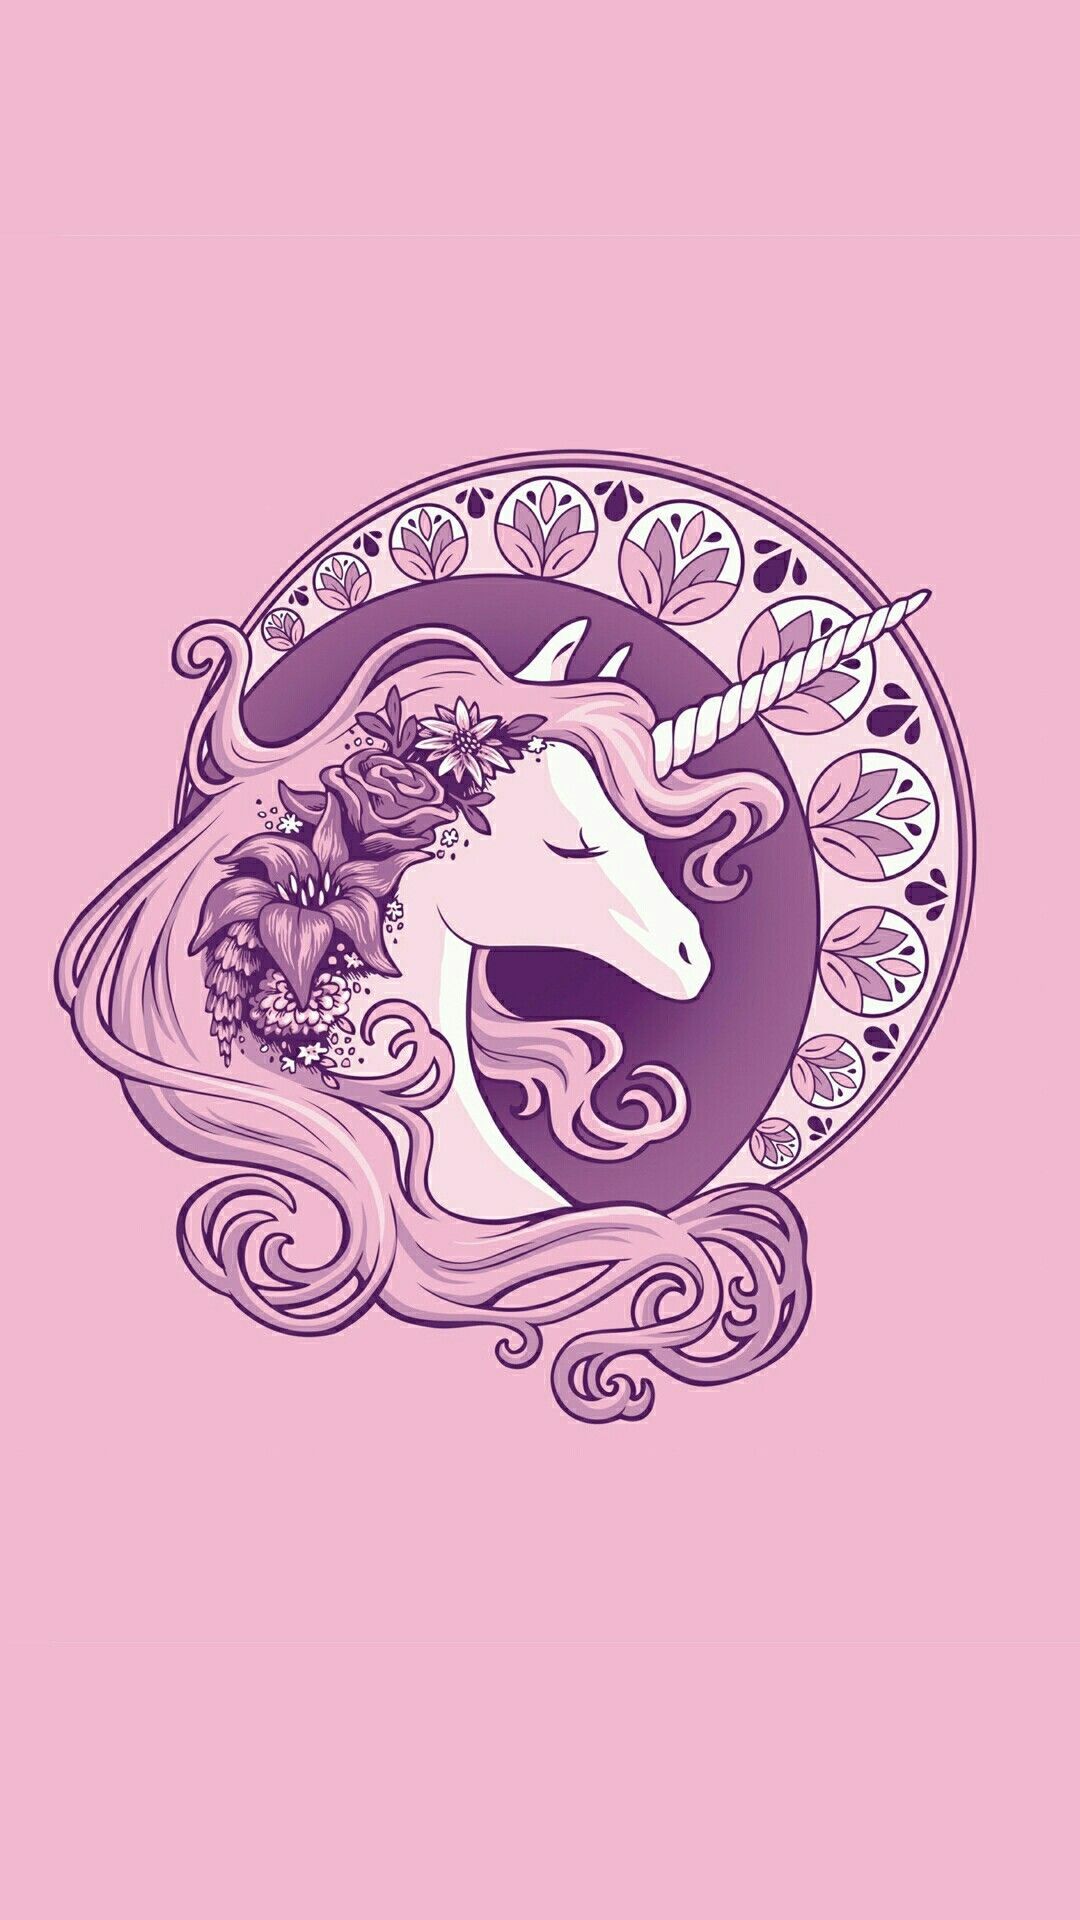 ✓[60+] Cartoon Unicorn Wallpaper - Android / iPhone HD Wallpaper Background  Download (png / jpg) (2023)